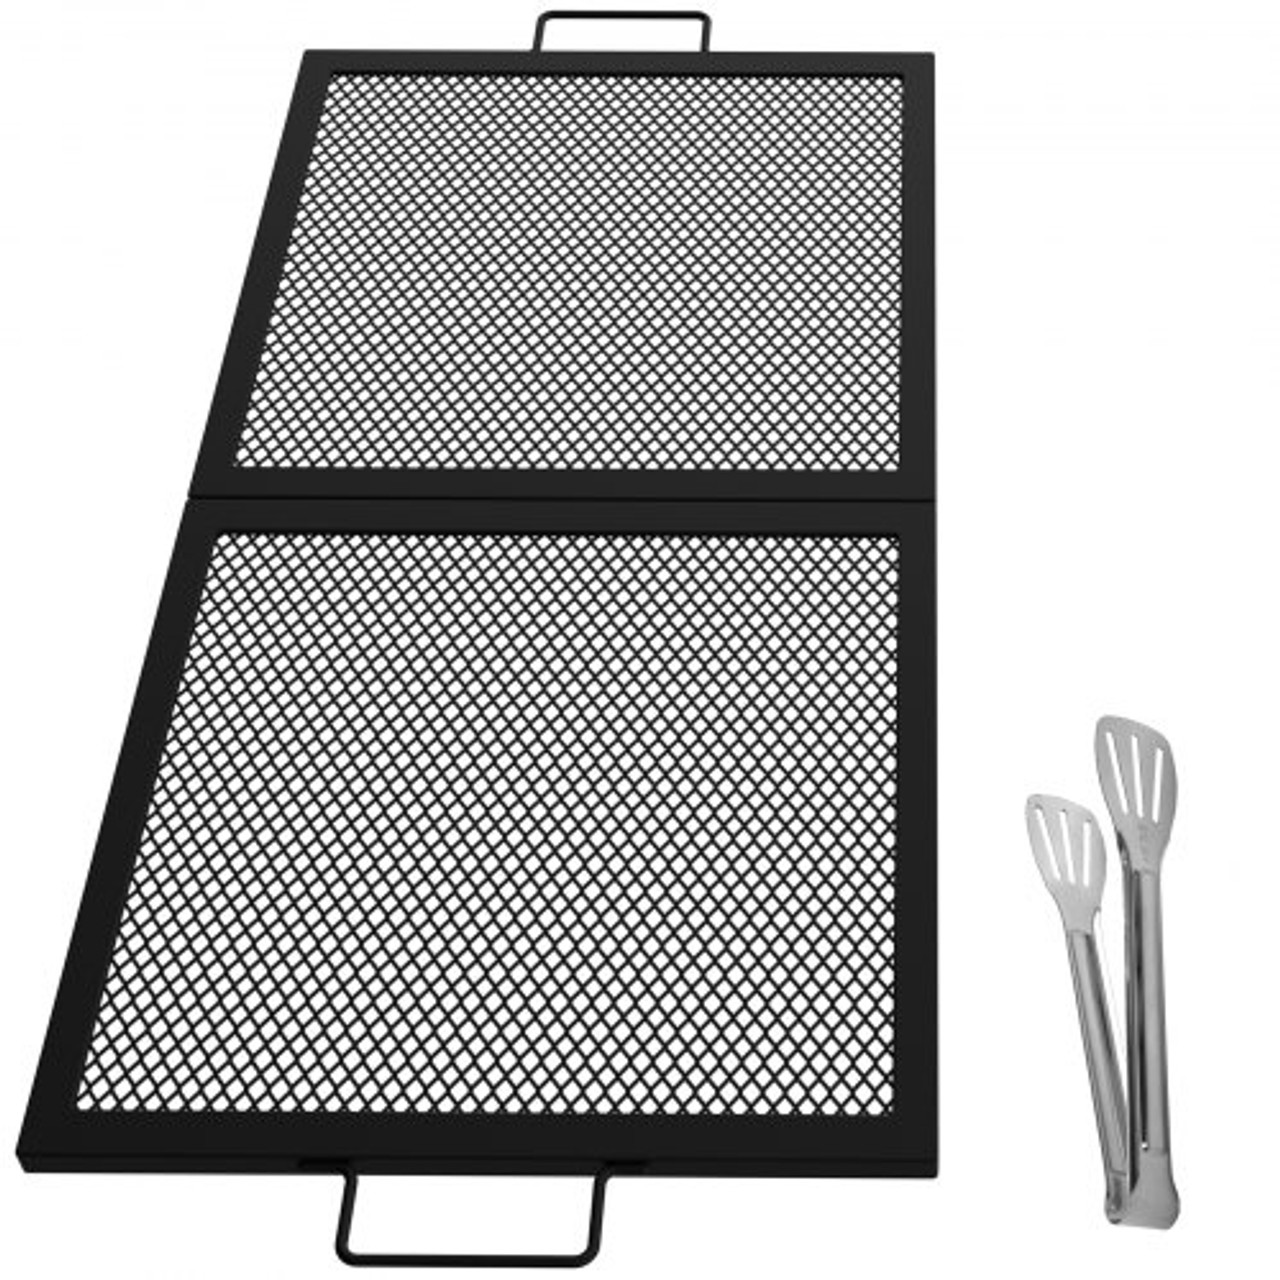 Precision Grilling Set With The GrillGrate Temp and Time